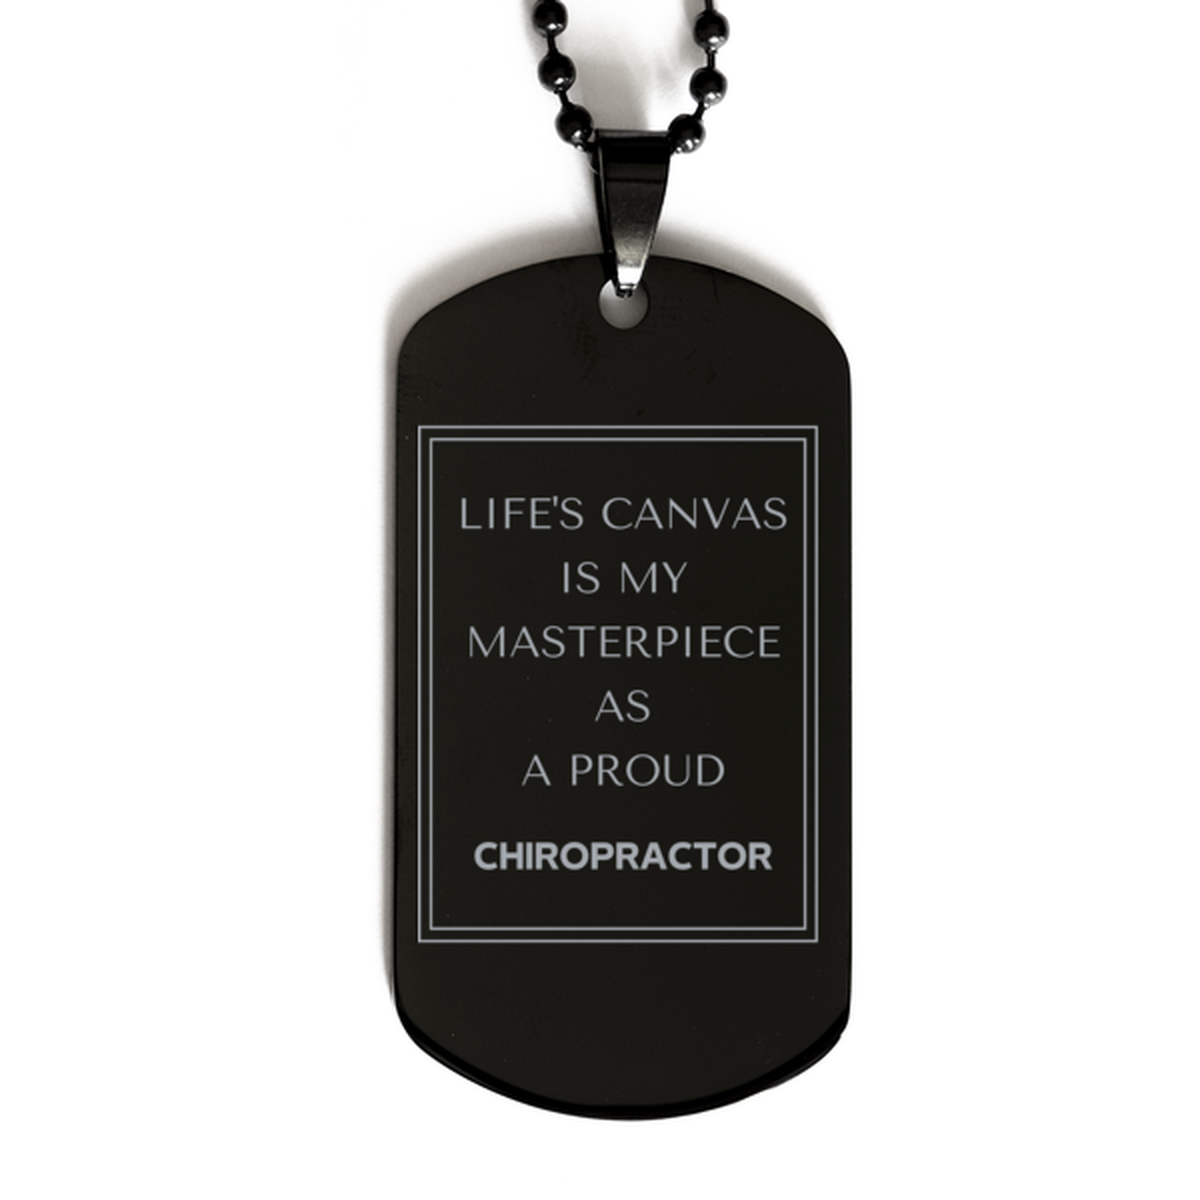 Proud Chiropractor Gifts, Life's canvas is my masterpiece, Epic Birthday Christmas Unique Black Dog Tag For Chiropractor, Coworkers, Men, Women, Friends